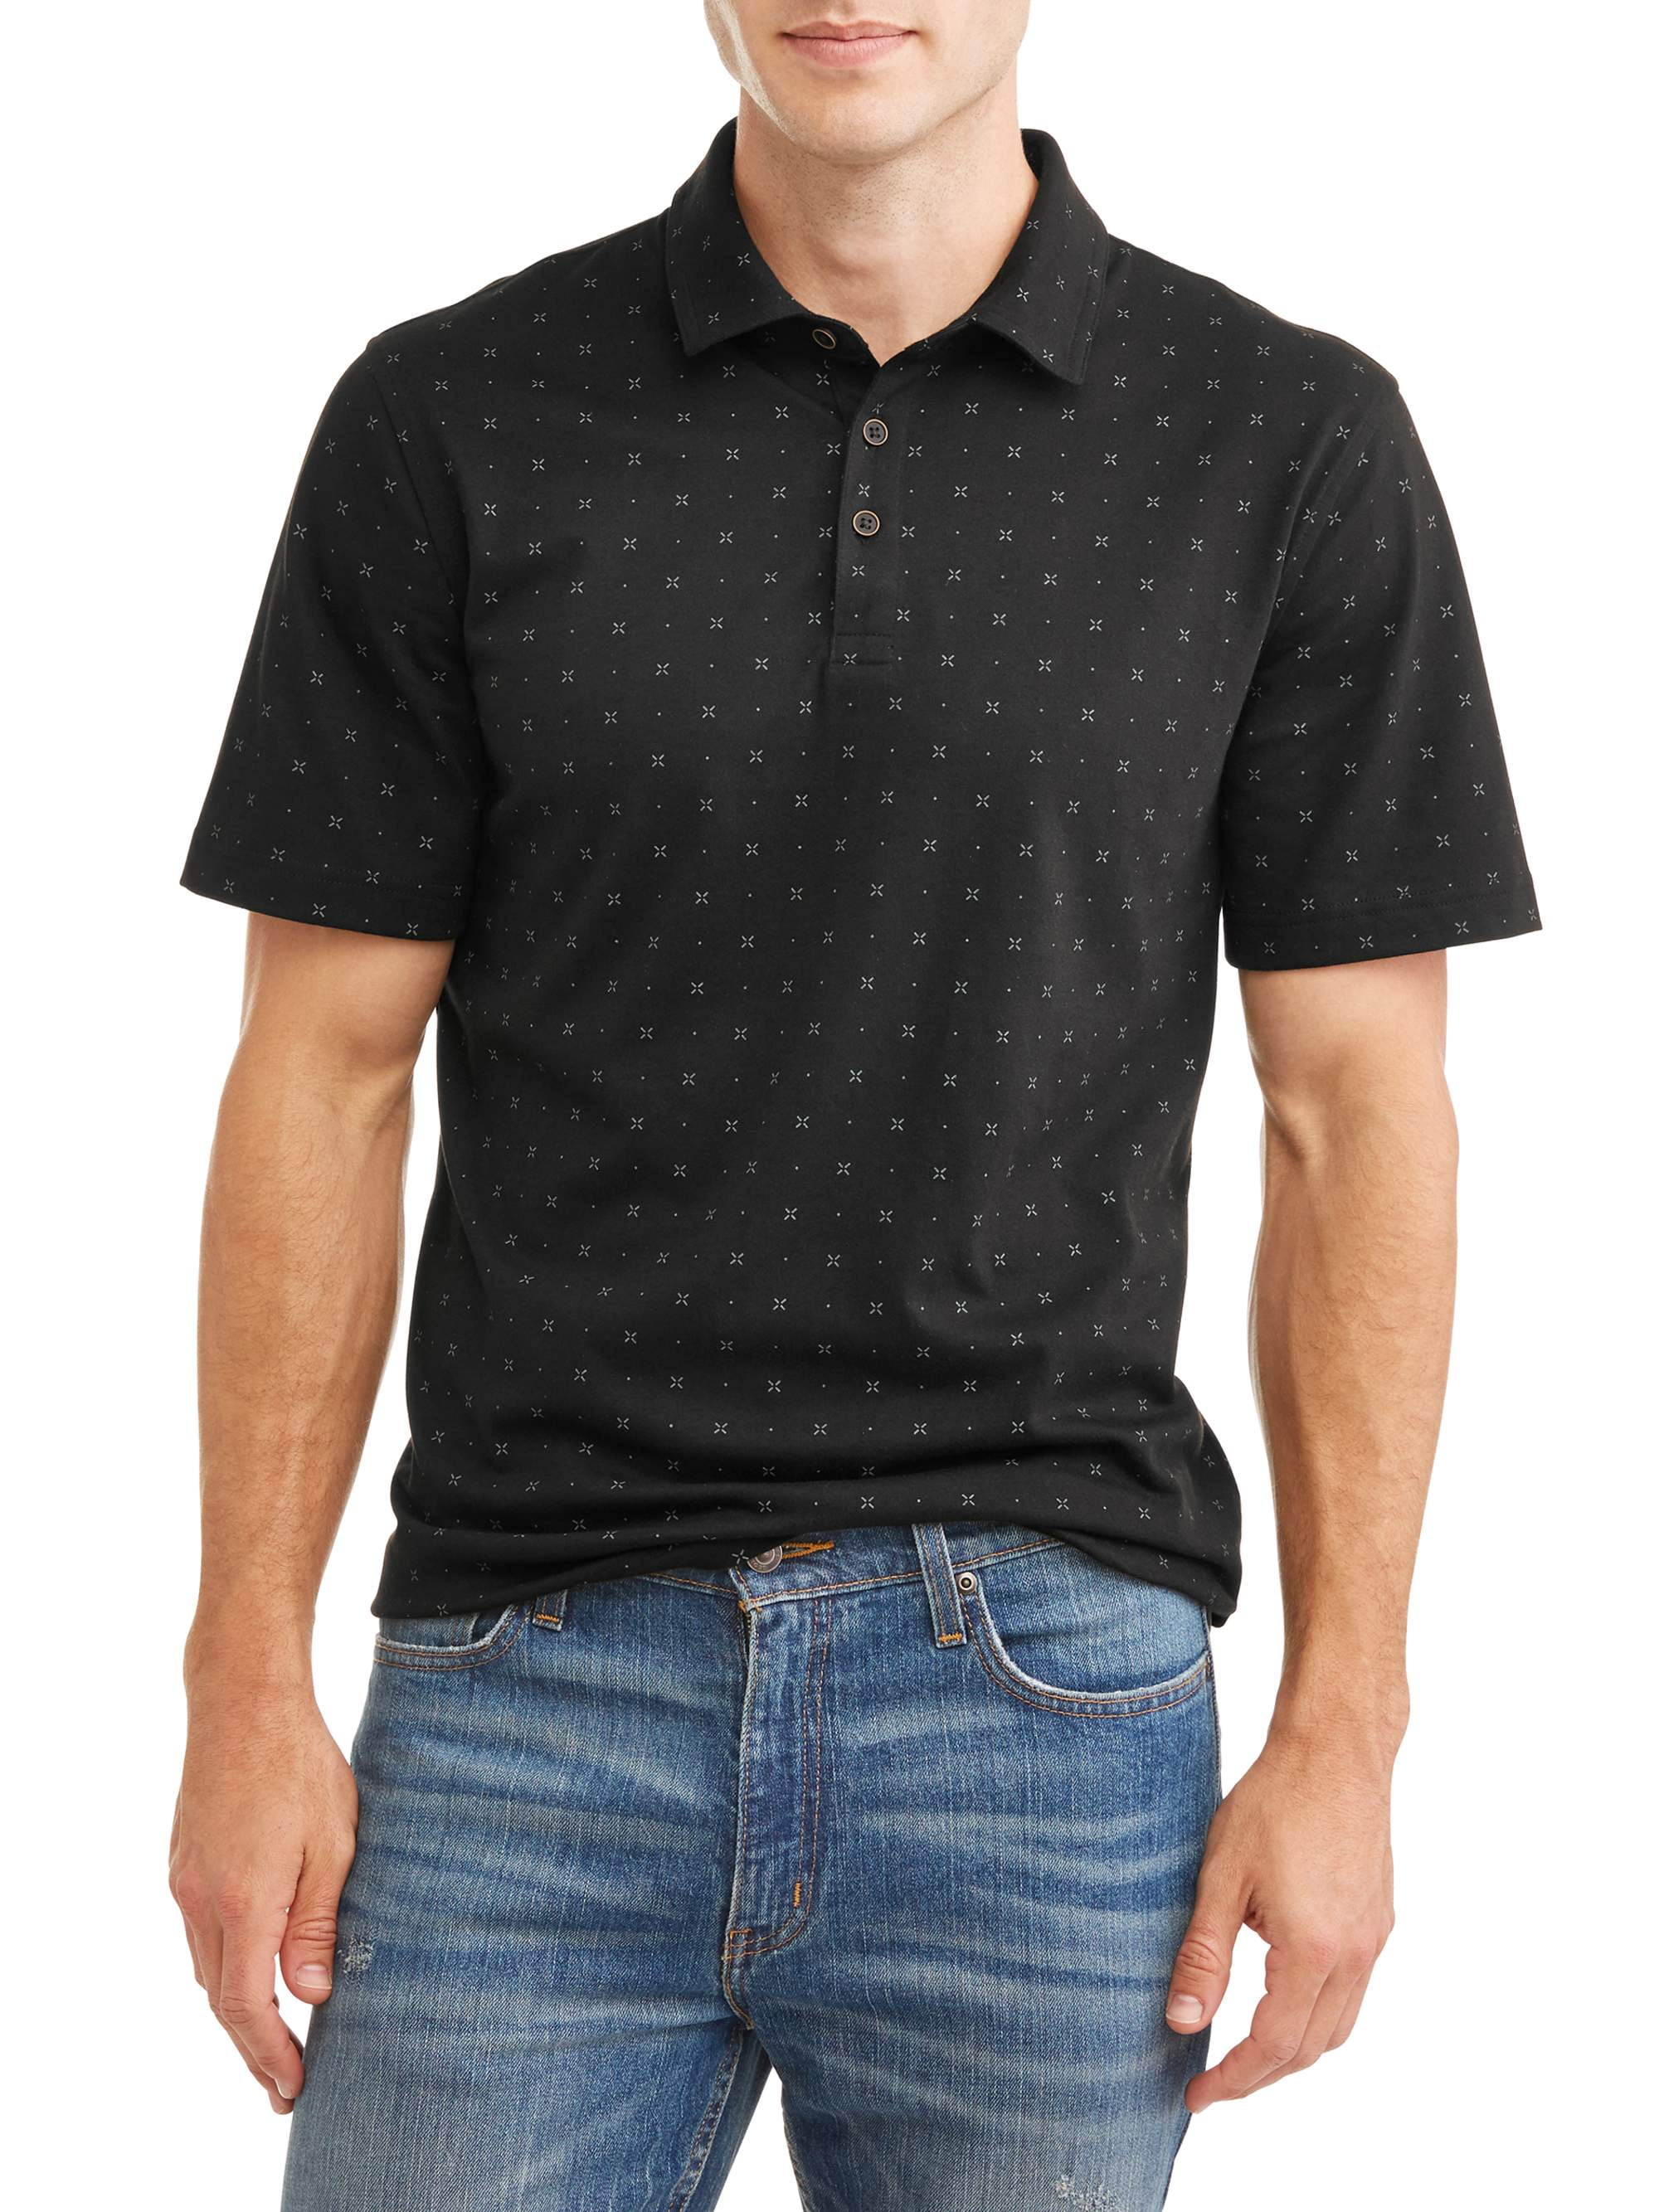 GEORGE - George Men's All Over Print Jersey Polo Shirt - Walmart.com ...